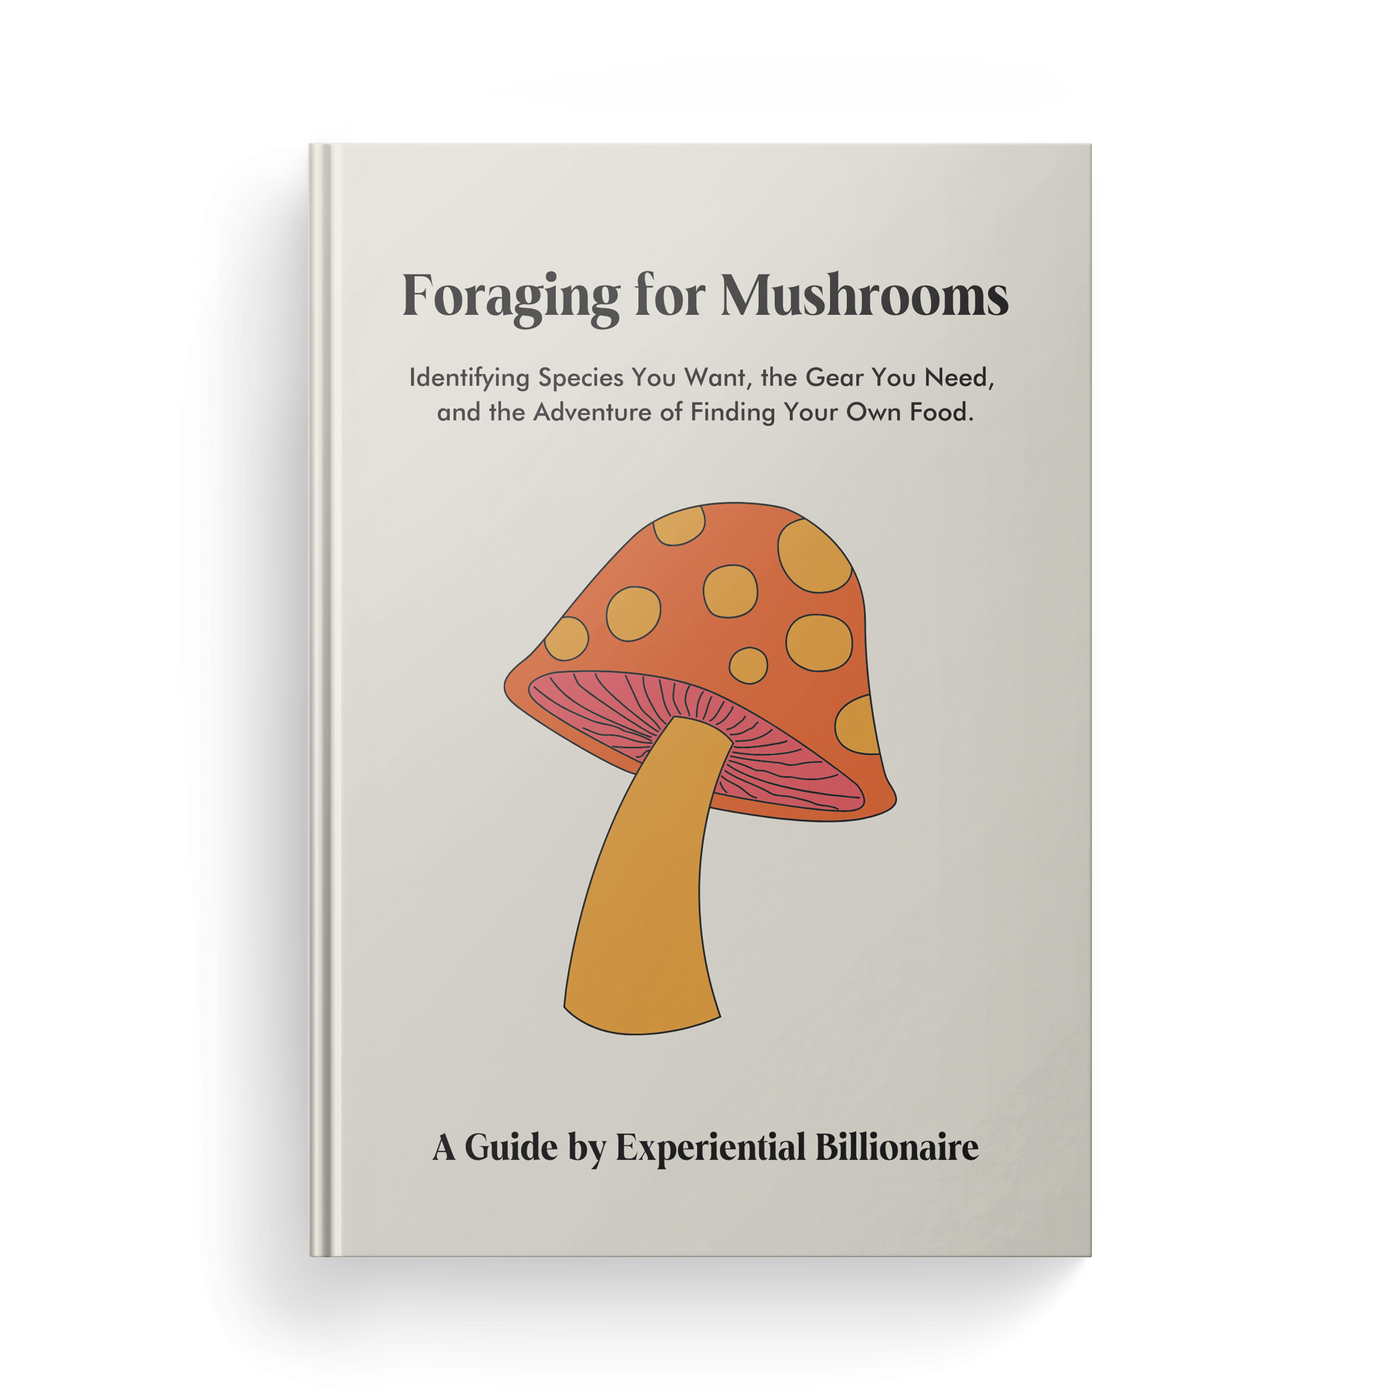 Experiential Billionaire's Guide to Foraging Wild Mushrooms